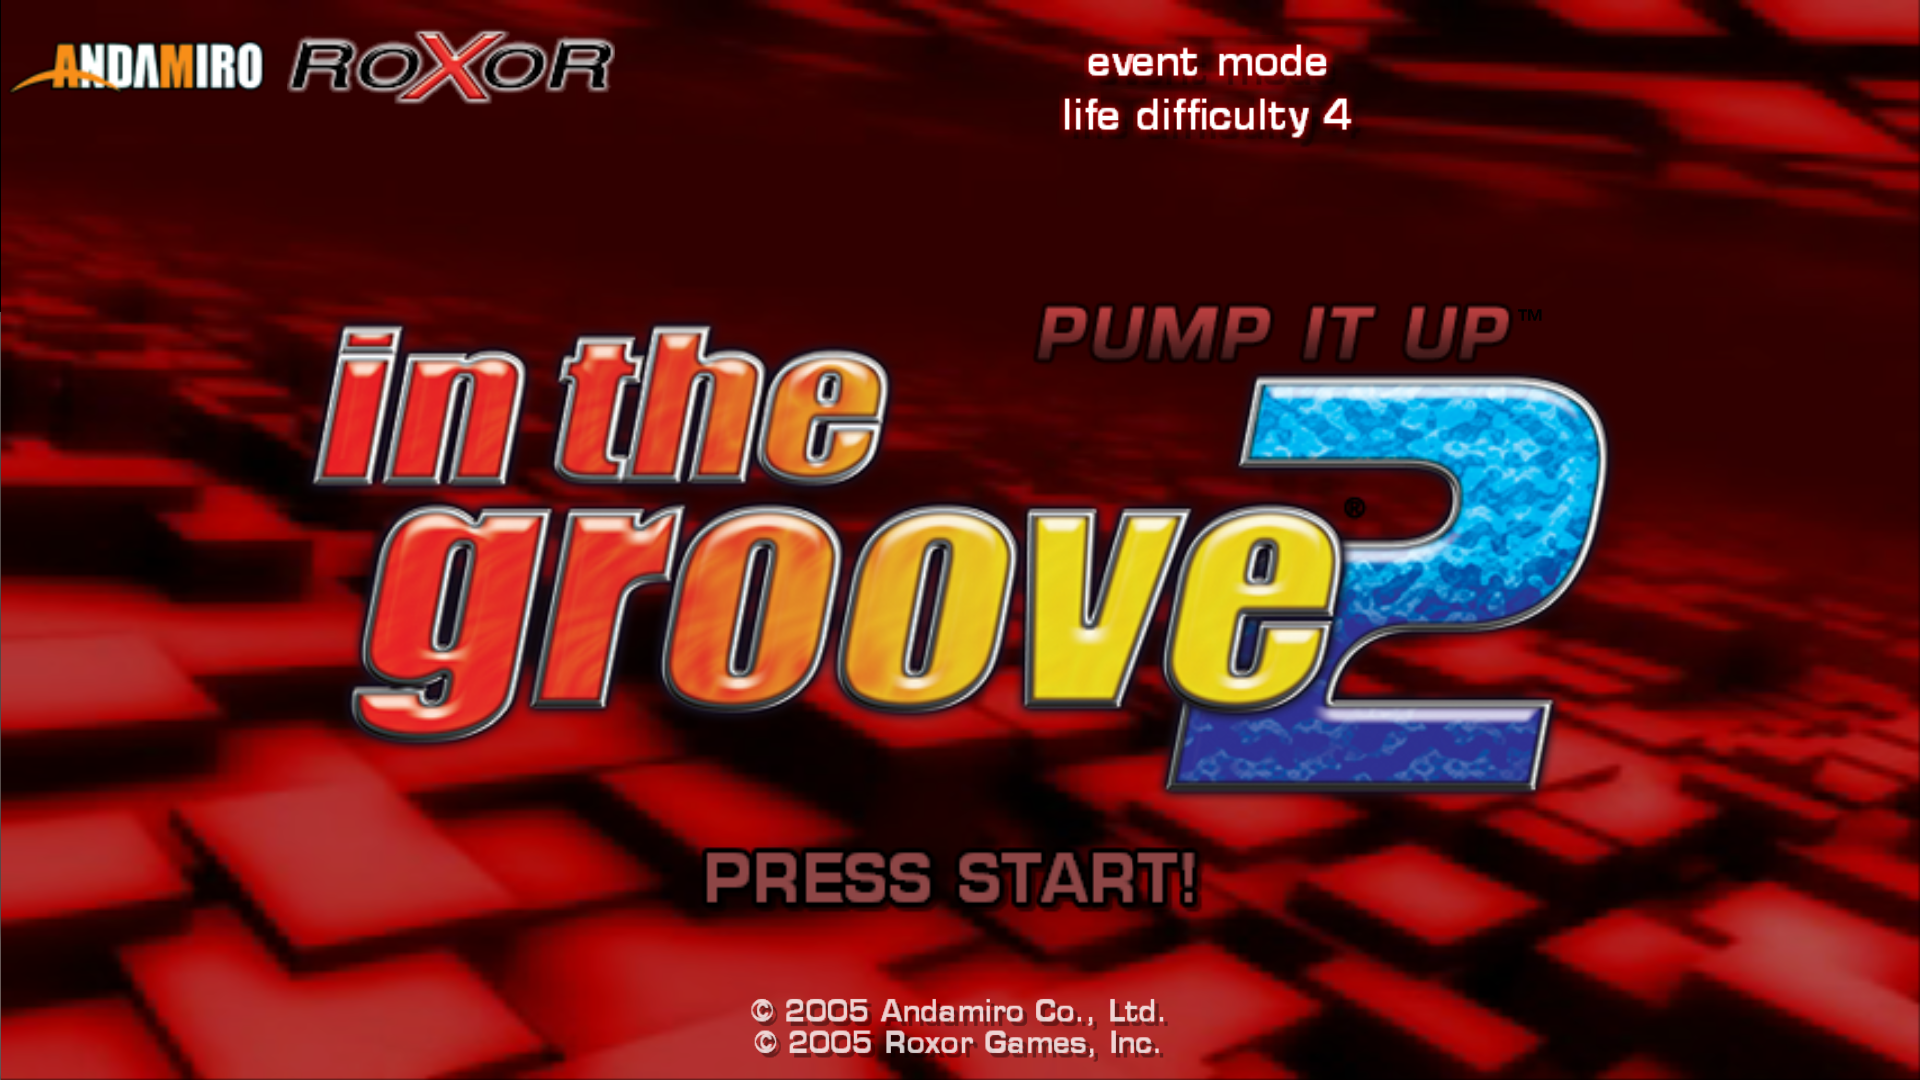 In the groove 2 pc download motorola ht1250 software free download